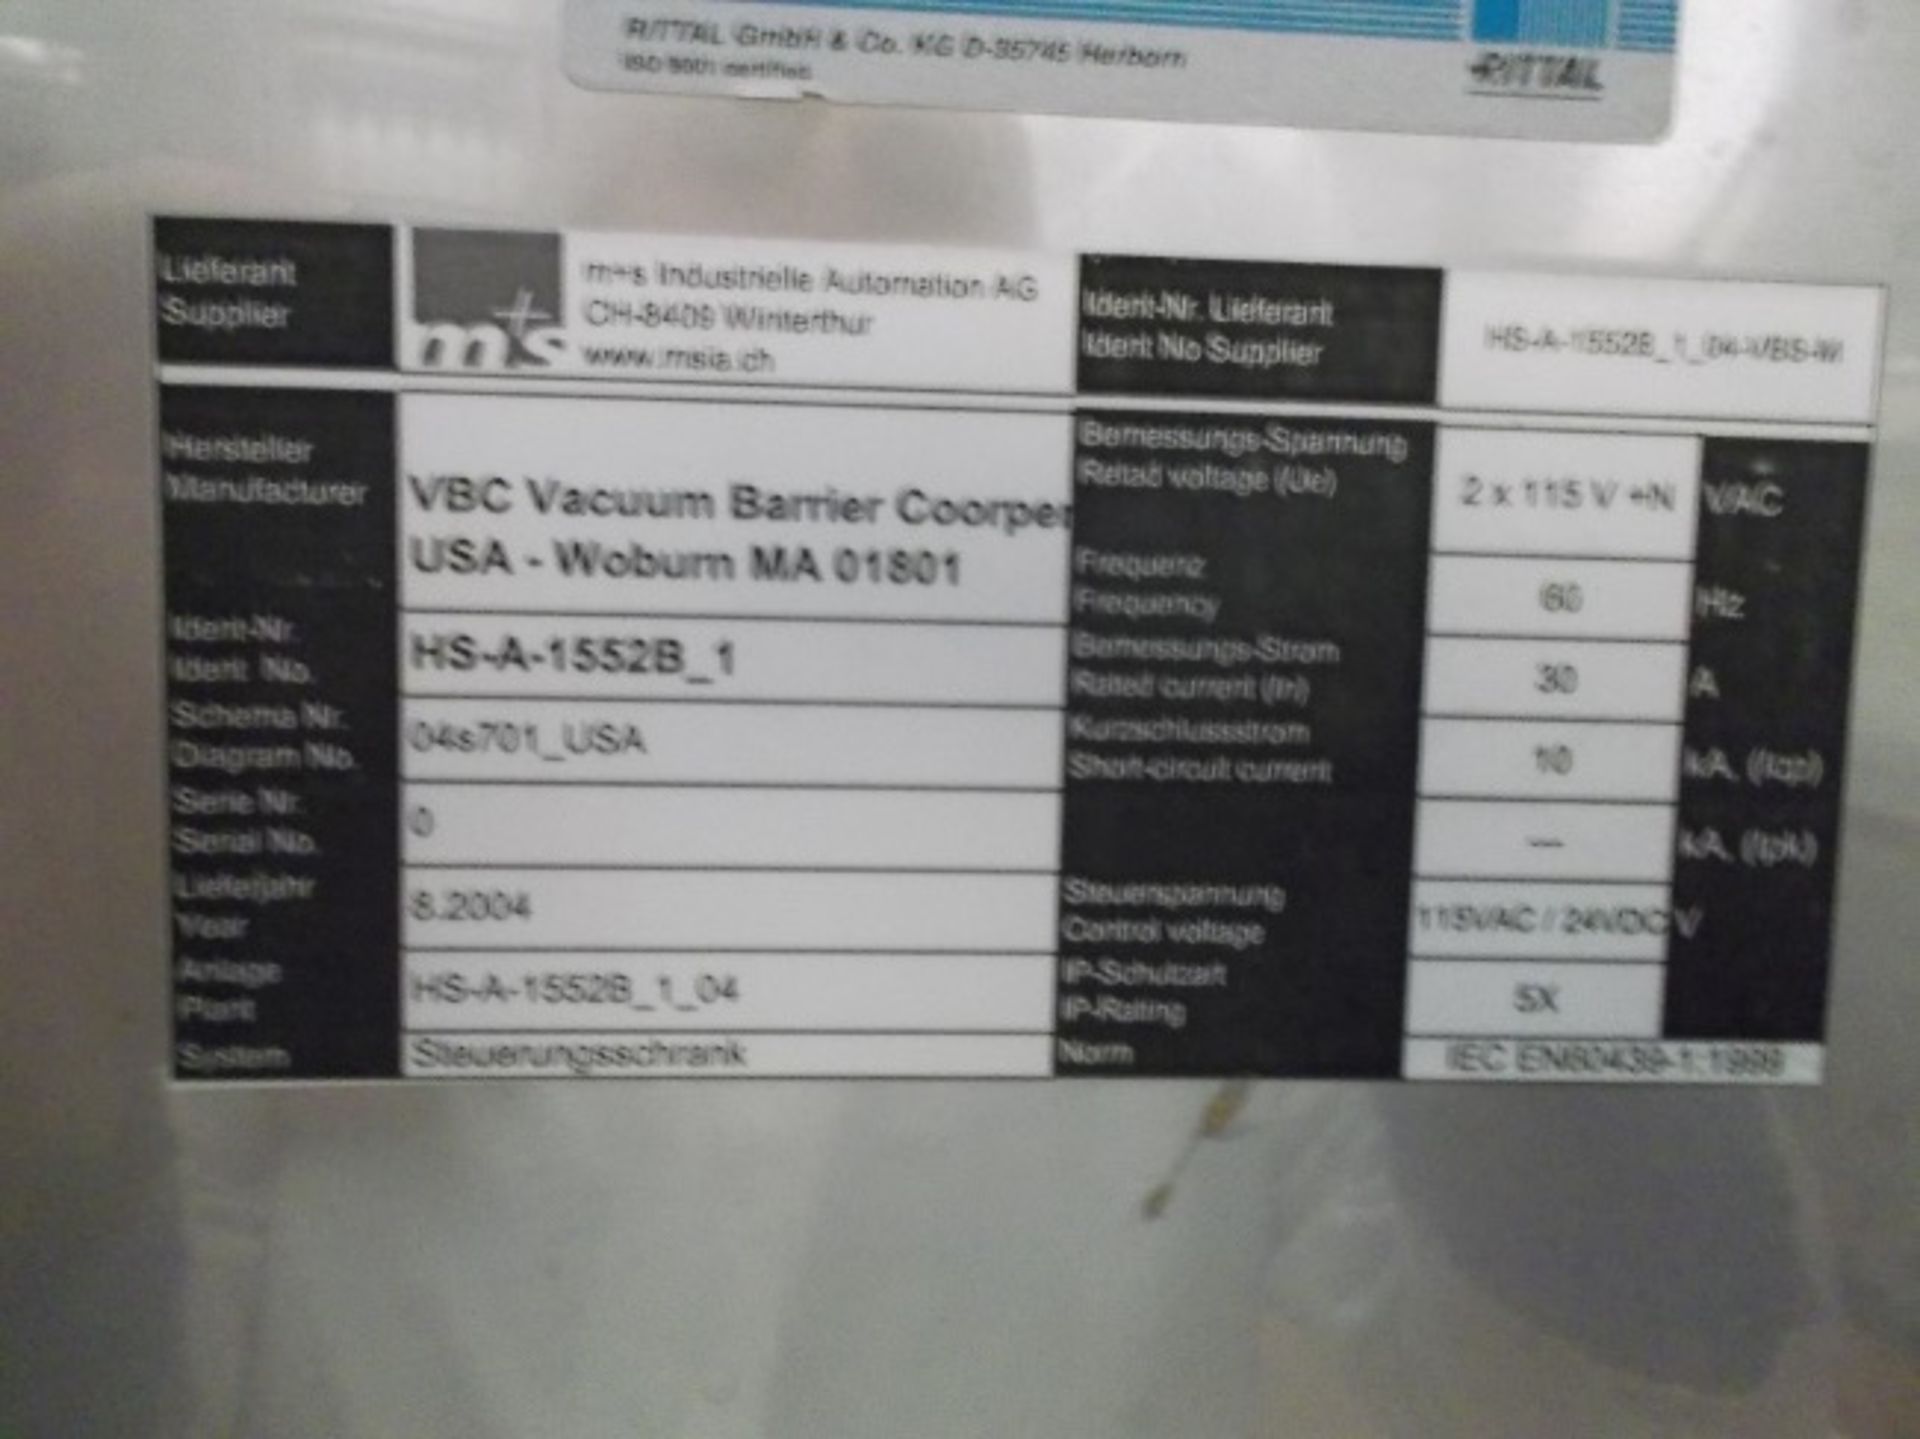 VACUUM BARRIER CORP ASEPTIC NITROGEN DOSER, MODEL ALN21, S/N HS-A-1552B, INCLUDES DOSING UNIT, - Image 4 of 5